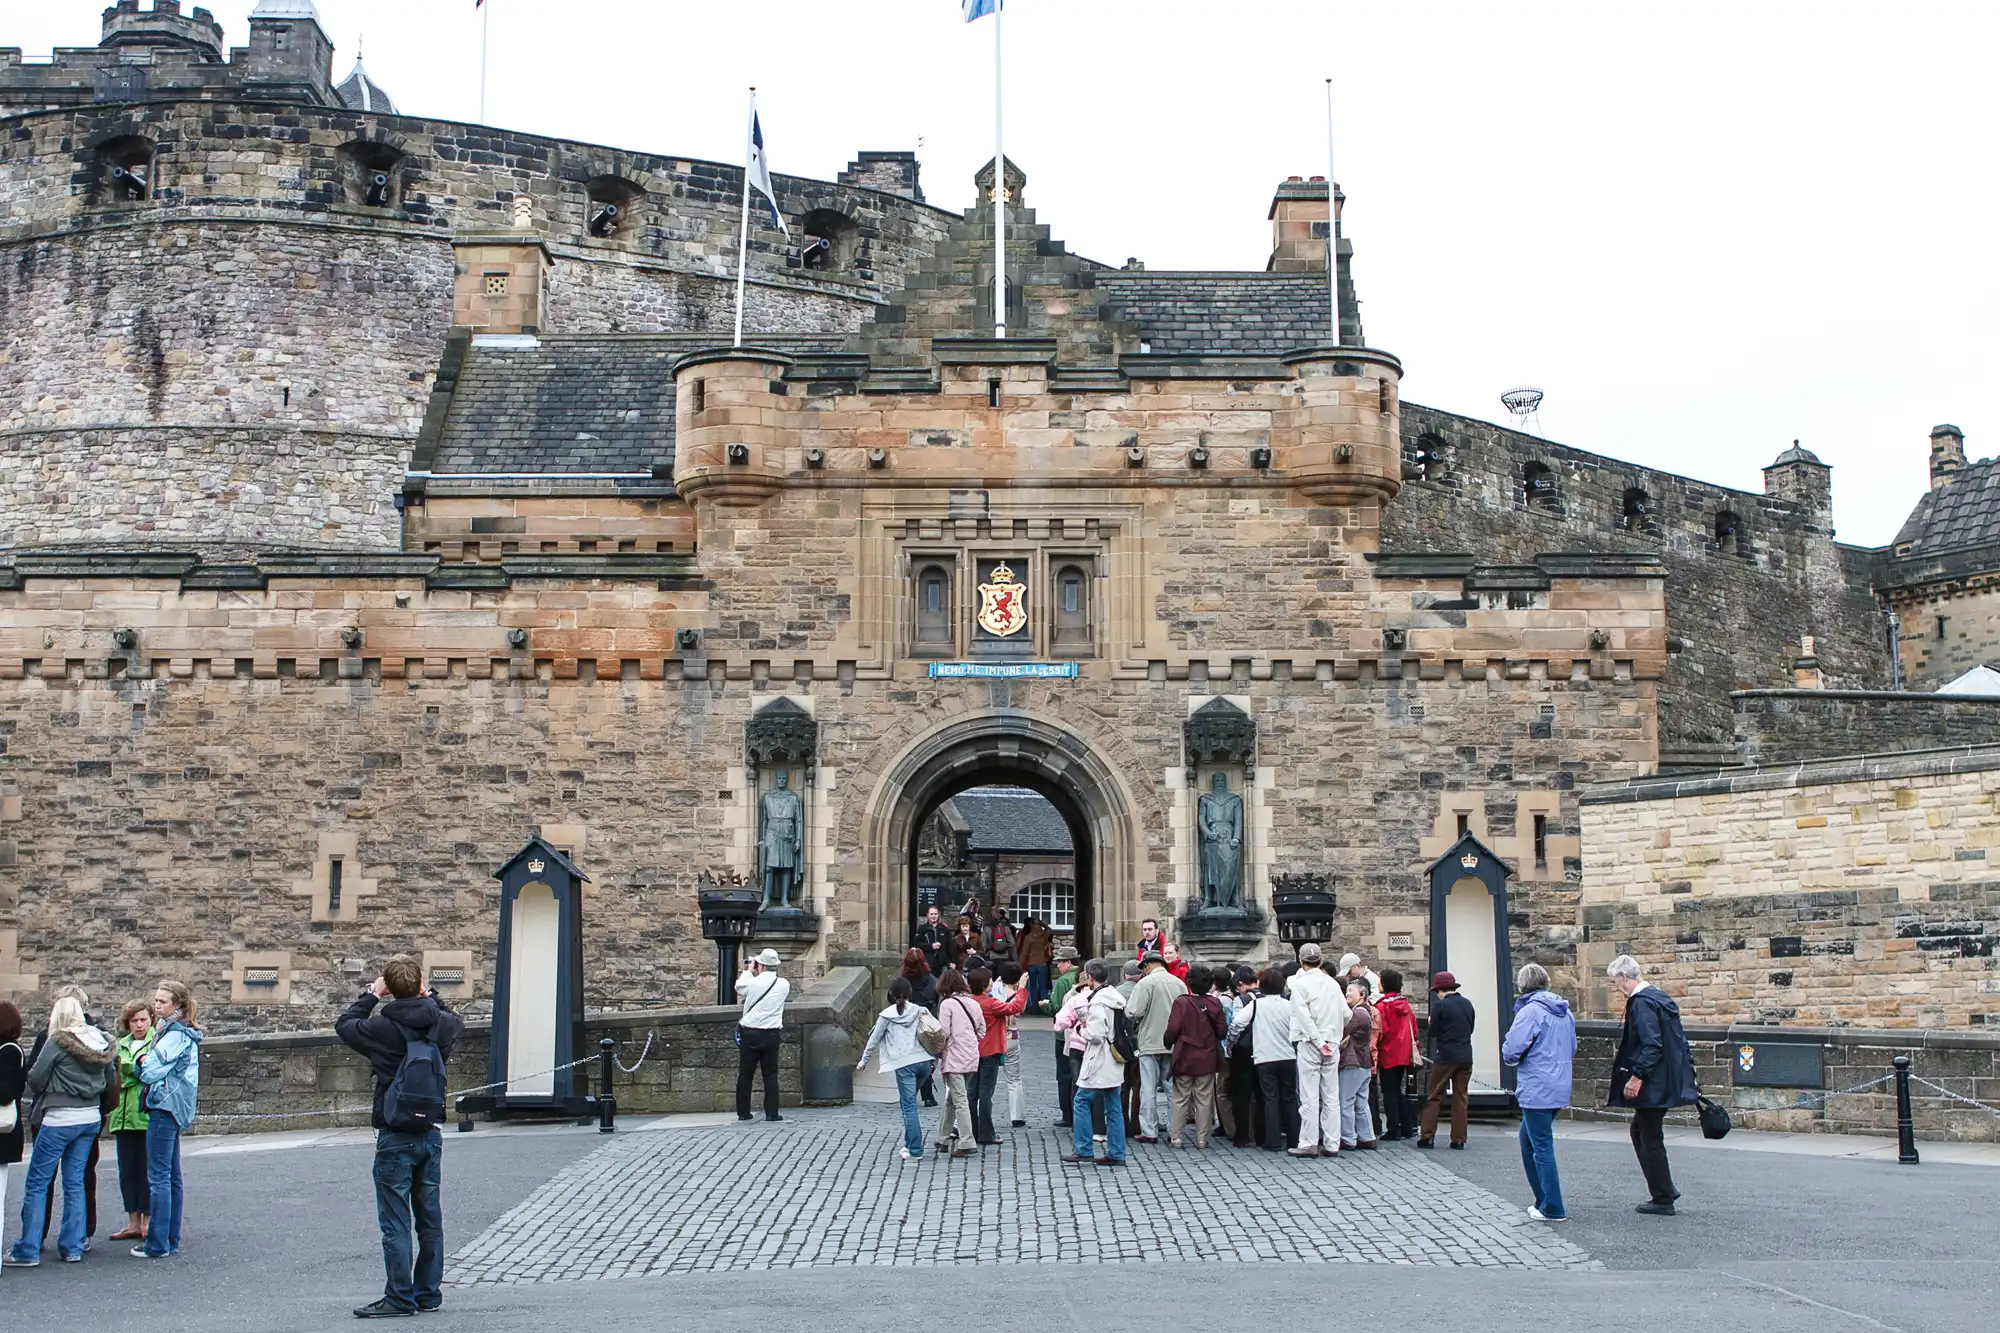 Tourists gather in front of the entrance to edinburgh castle, a historic fortress located in edinburgh, scotland.